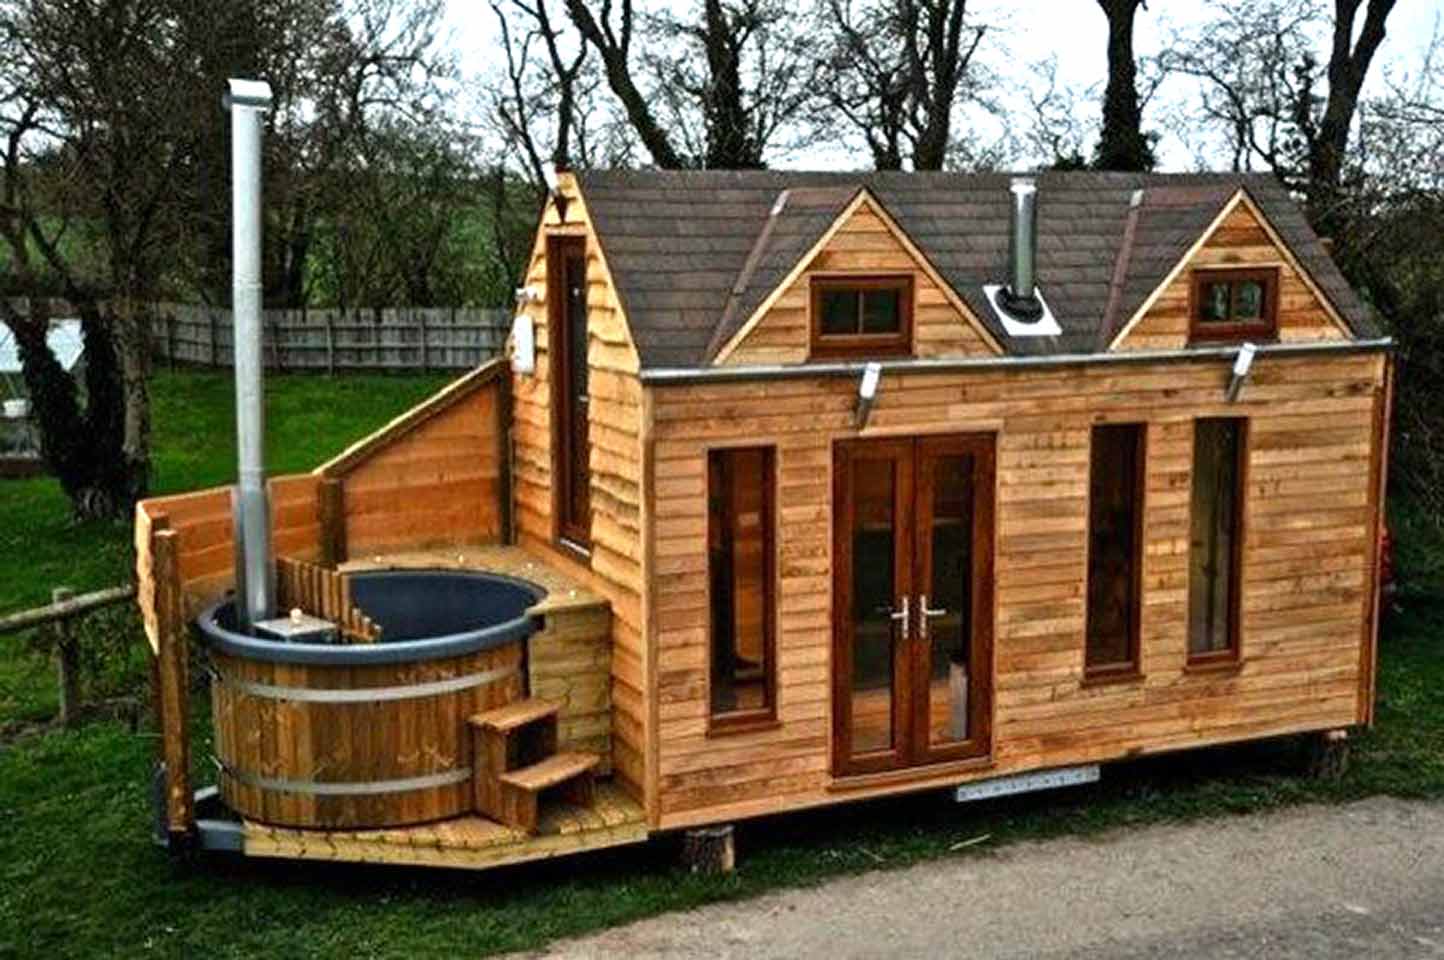 ... Blog: Tiny Cabin on Trailer with Outdoor Hot Tub Built In -- in UK